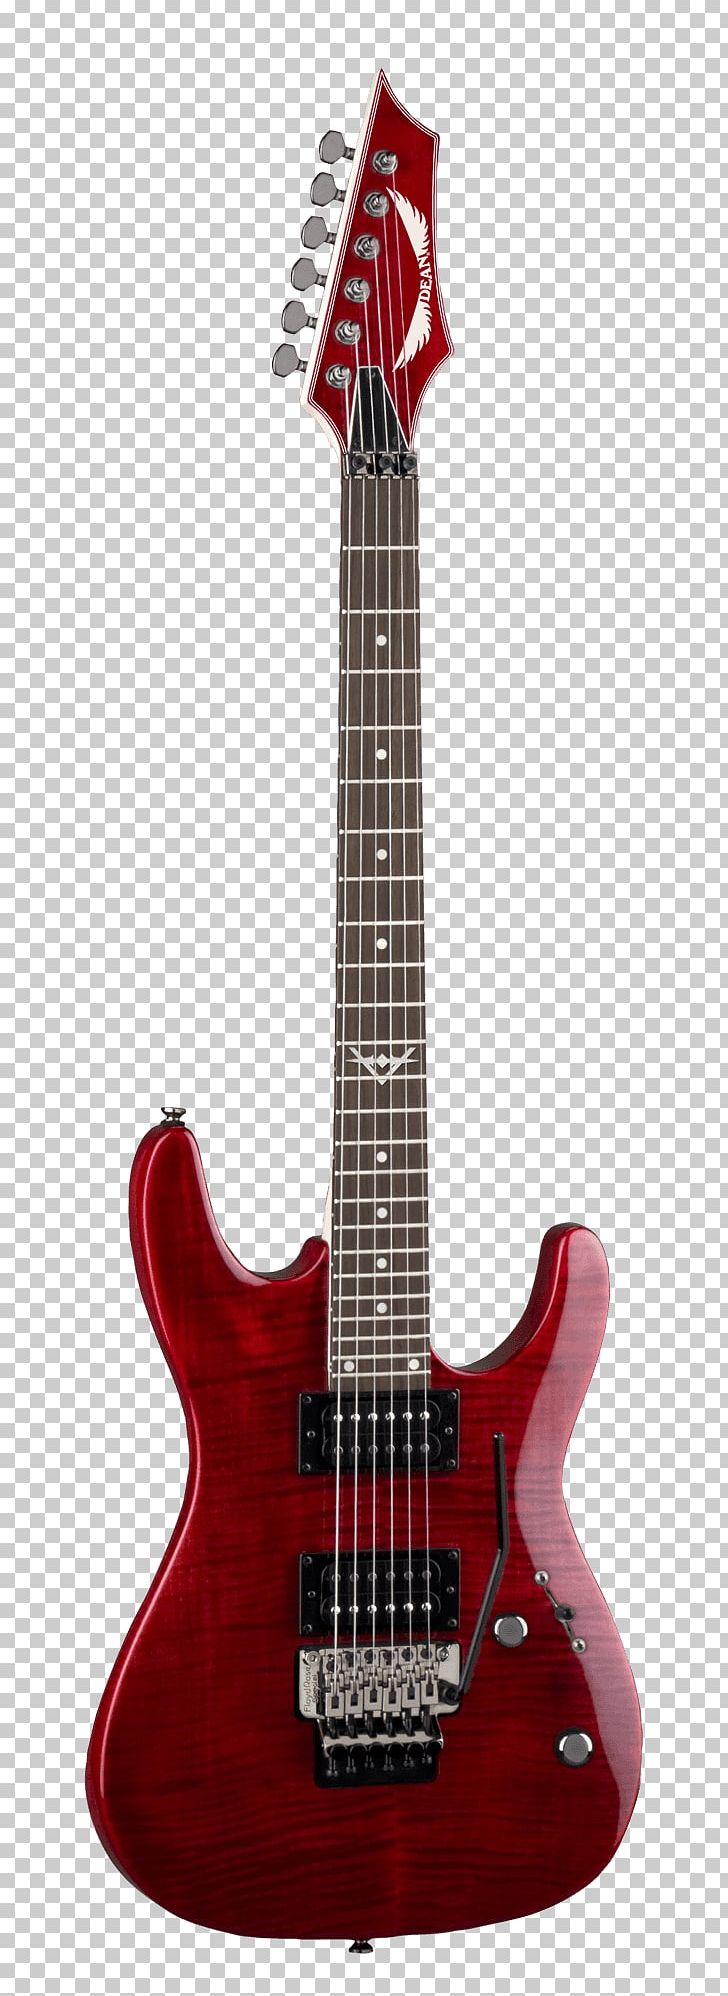 Jackson Dinky Musical Instruments Dean Guitars Electric Guitar PNG, Clipart, Acoustic Electric Guitar, Guitar Accessory, Jackson Guitars, Music, Musical Instrument Free PNG Download